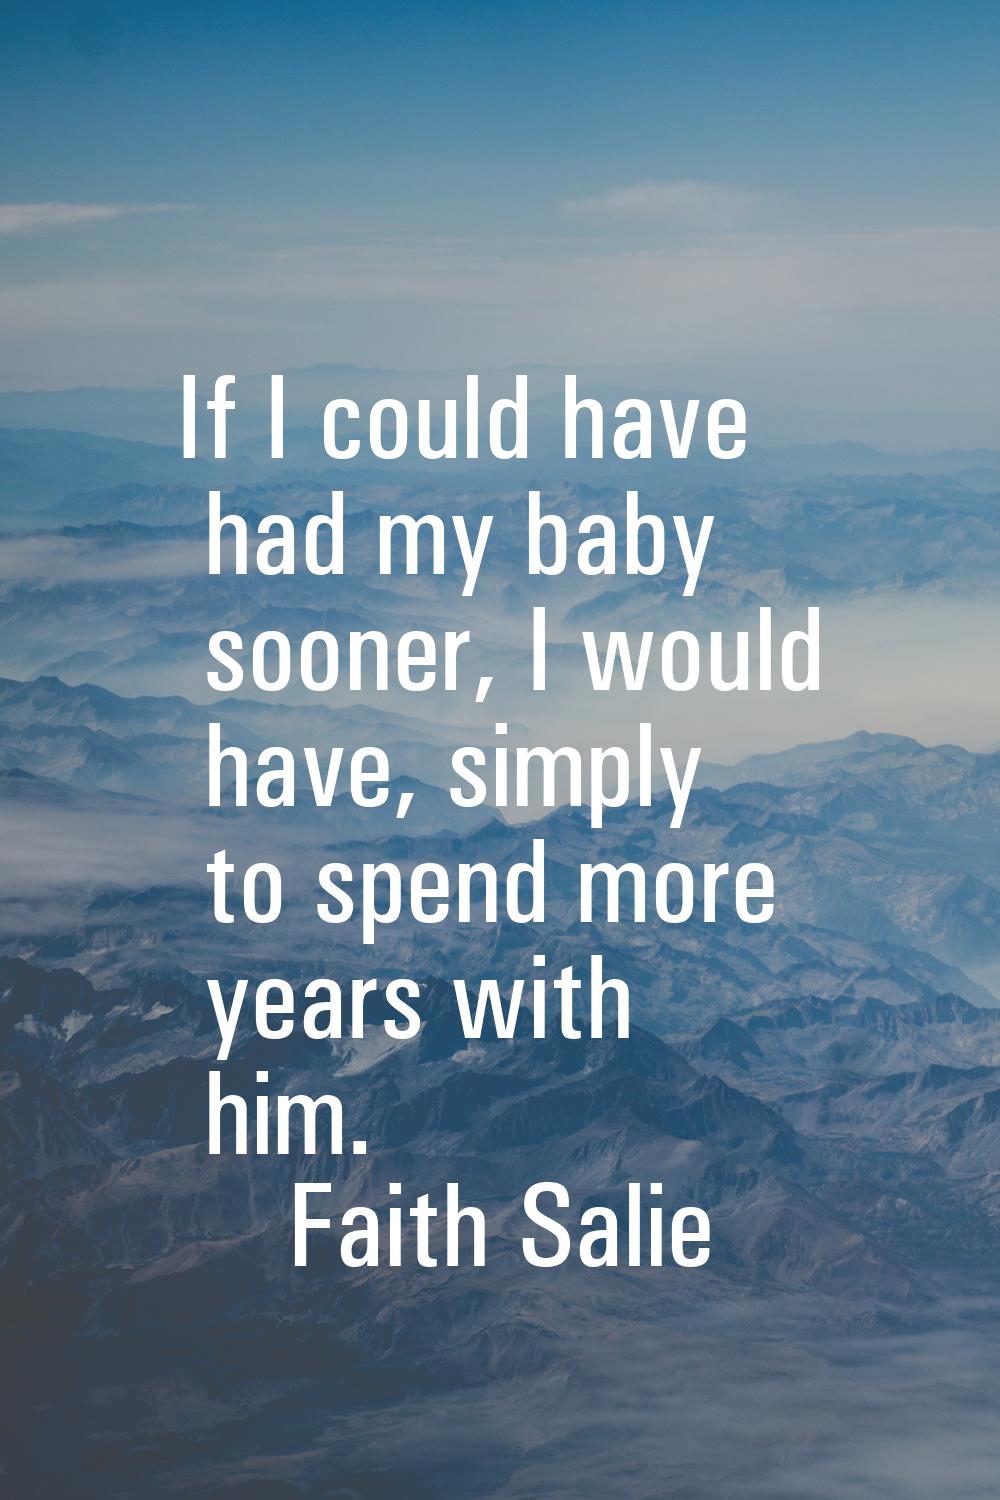 If I could have had my baby sooner, I would have, simply to spend more years with him.